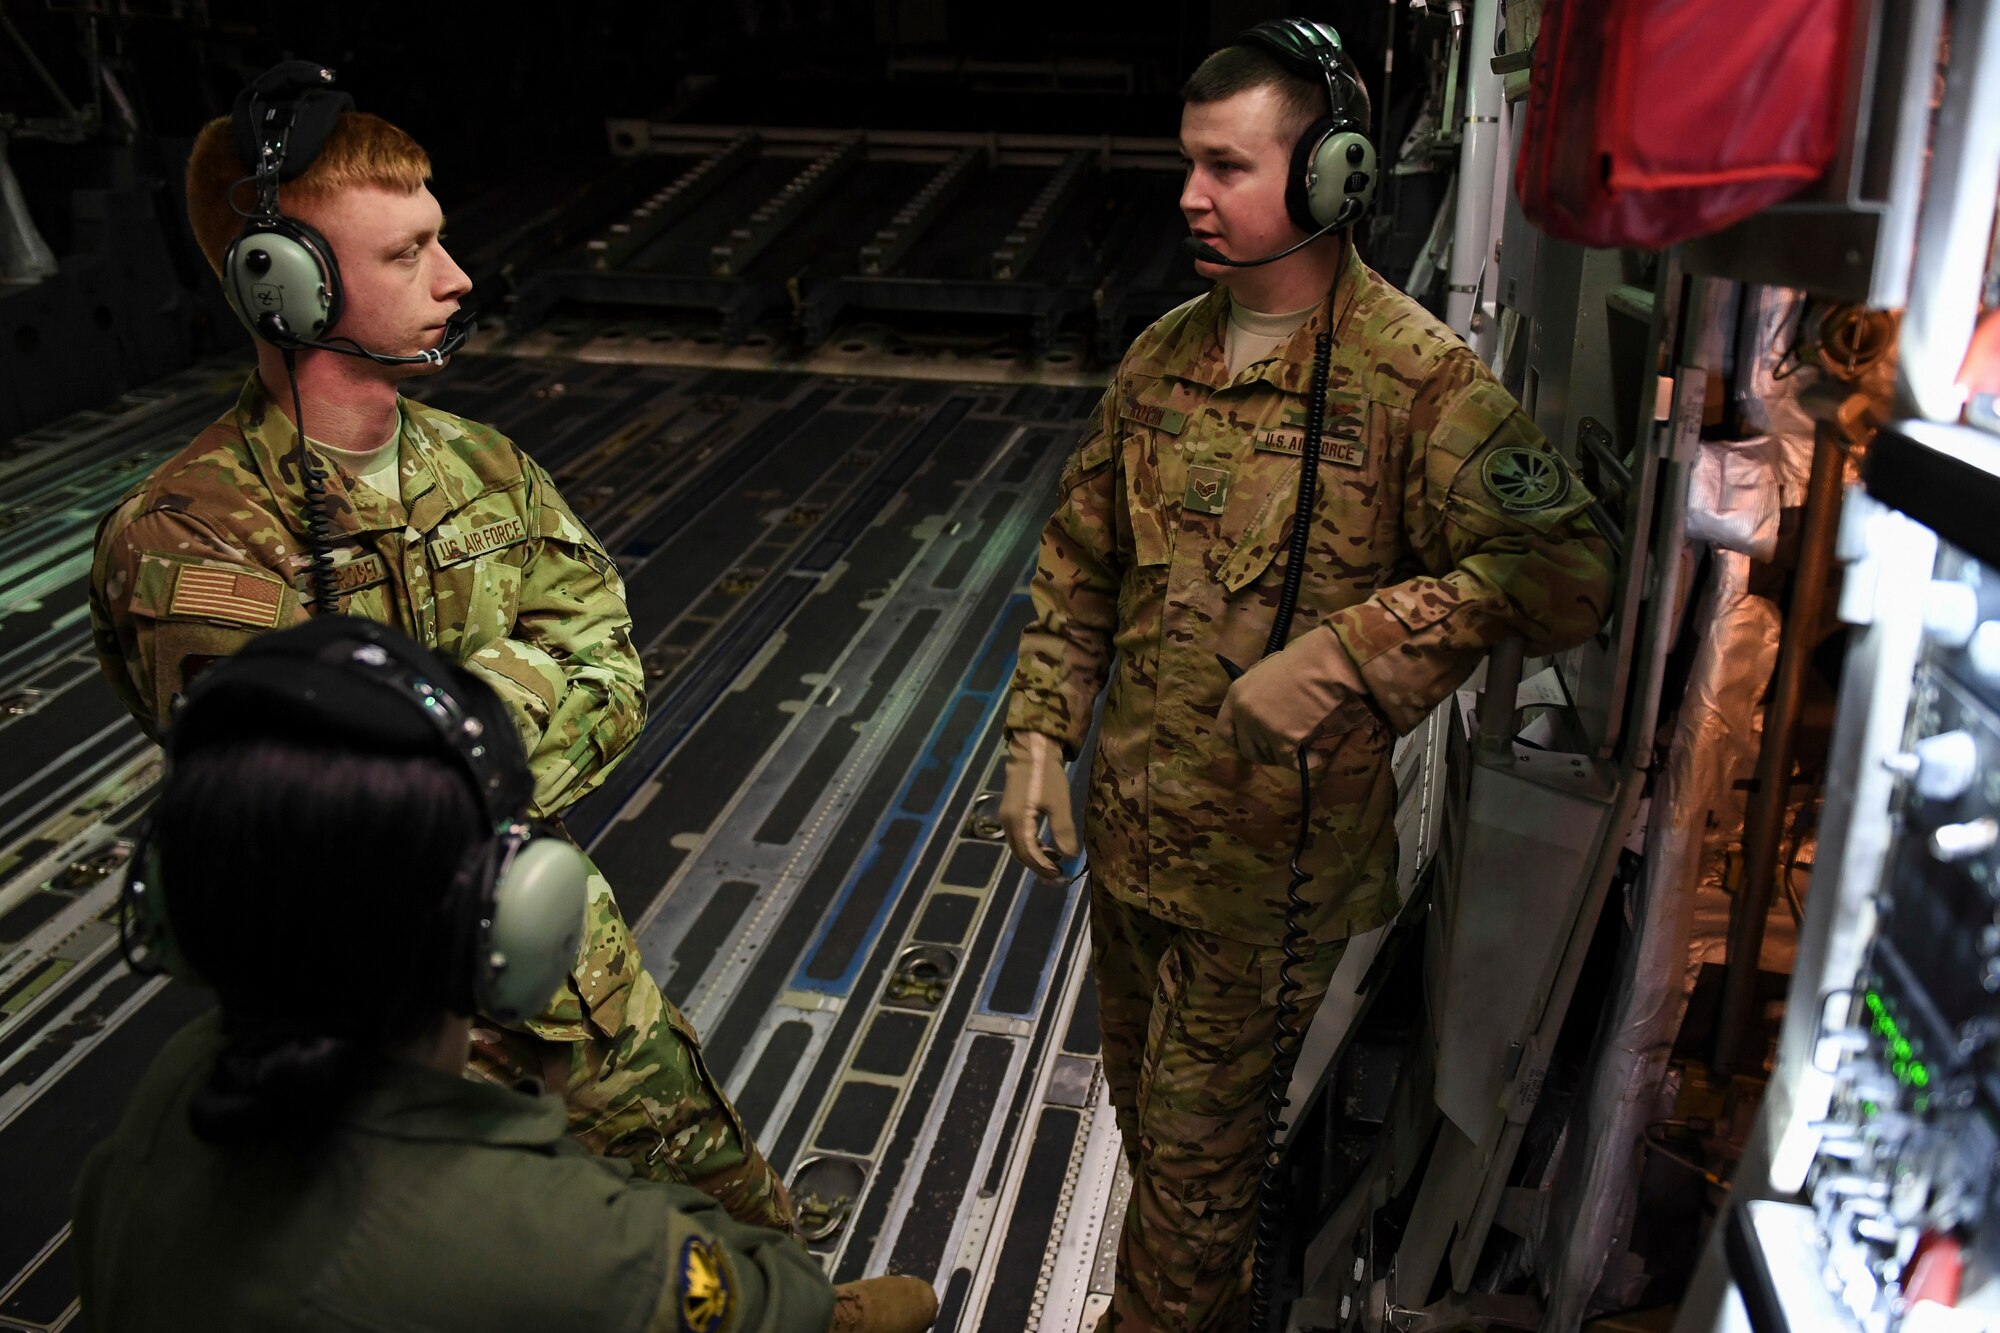 Senior Master Sgt. Becky Schatzman, Senior Airman Steven Strobel and Staff Sgt. Carl Kocon, loadmasters with the 758th Airlift Squadron discuss emergency in-flight procedures with, during a training flight to March Air Reserve Base, California, March 3, 2019. In order for loadmasters to be fully operational, they must complete approximately 50 tasks including night operation training, cargo loading operations, combat procedures, and in-flight emergency procedures. (U.S. Air Force photo by Joshua J. Seybert)